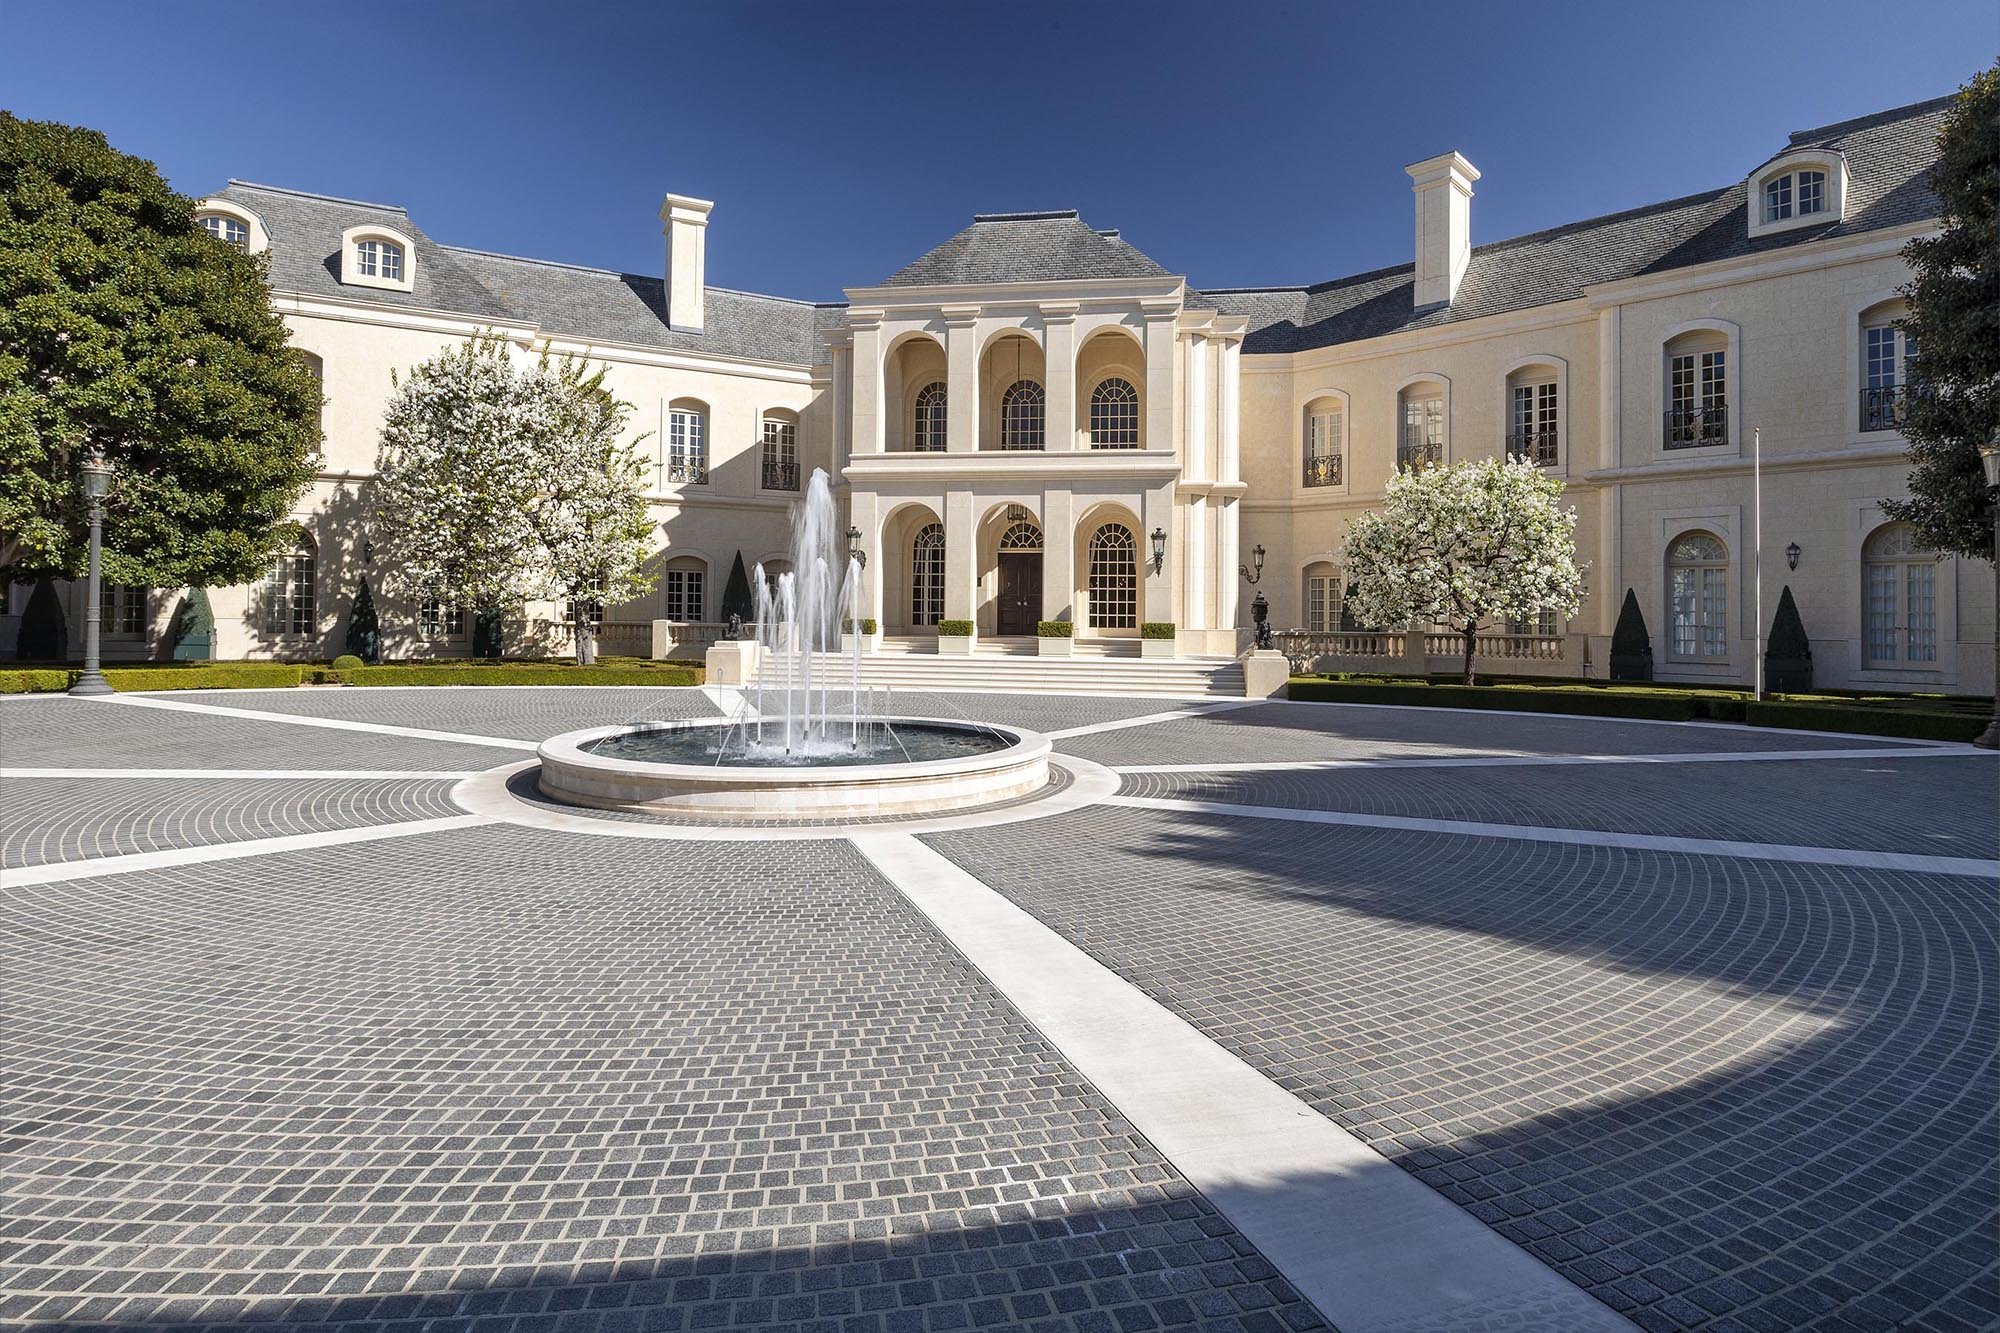 Francis York The 'Spelling Manor' is Back on the Market for $165M 4.jpg